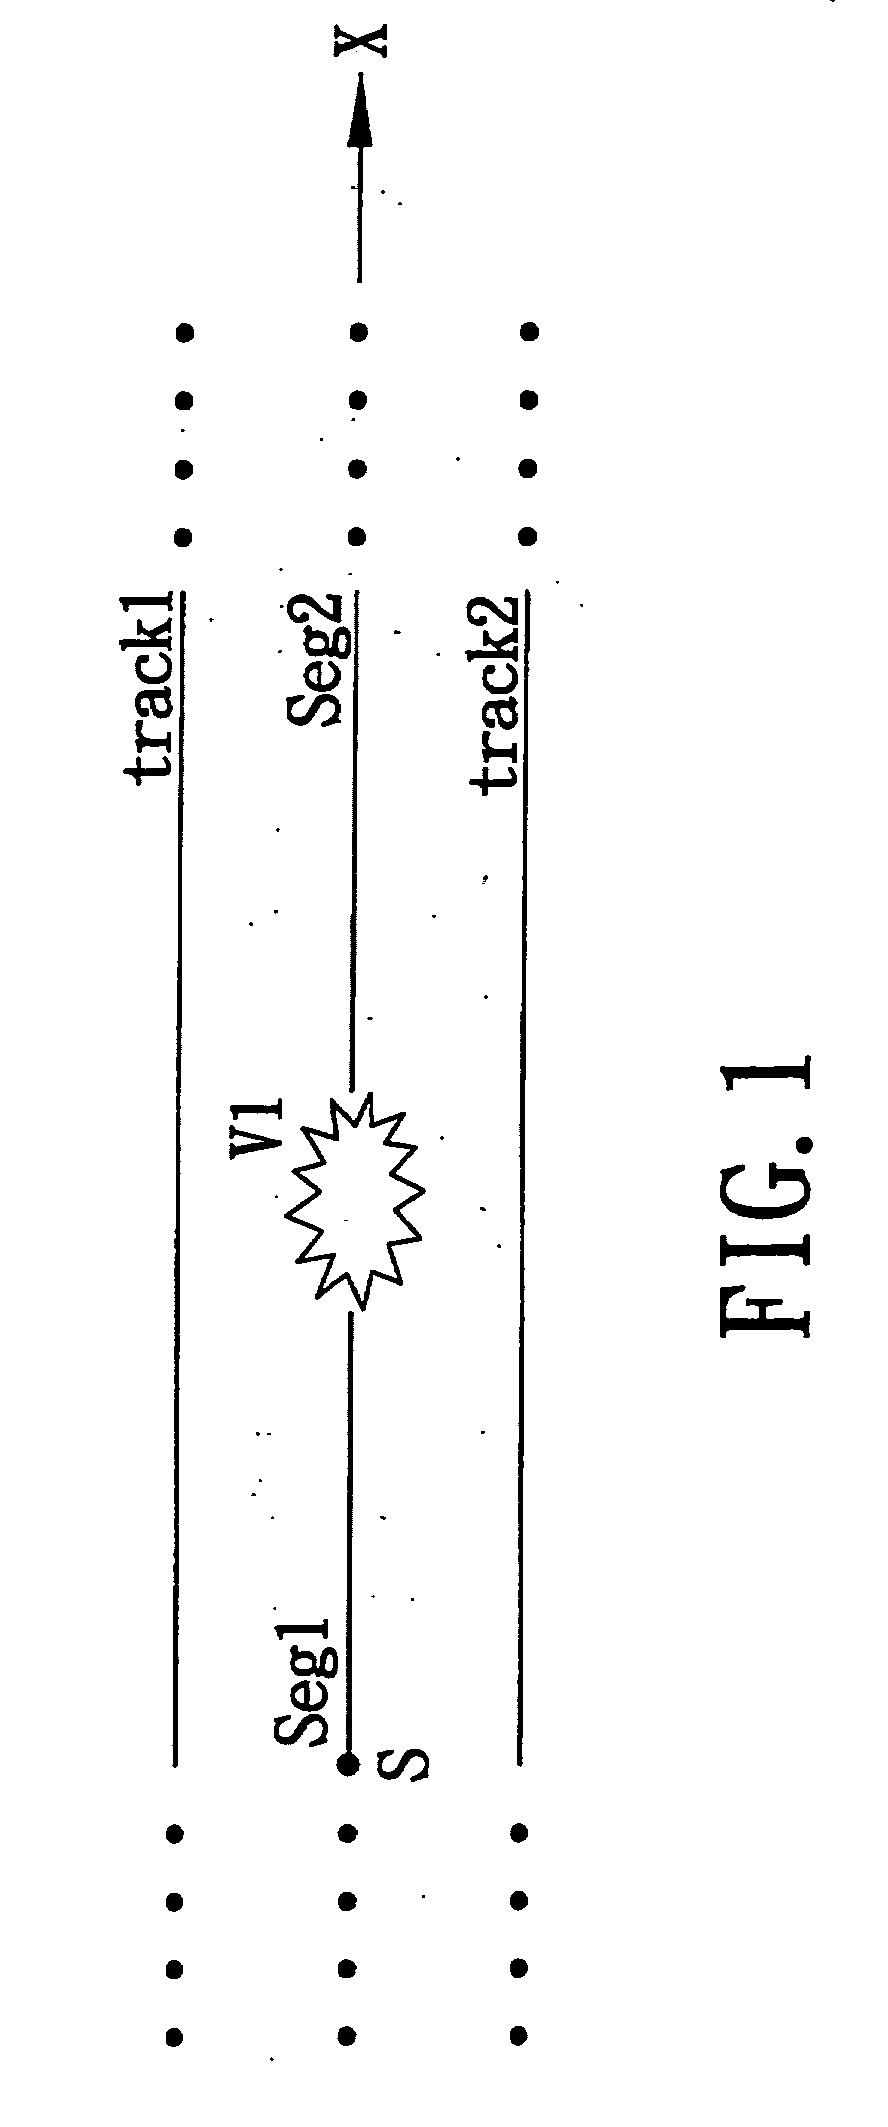 Method for concurrent search and select of routing patterns for a routing system